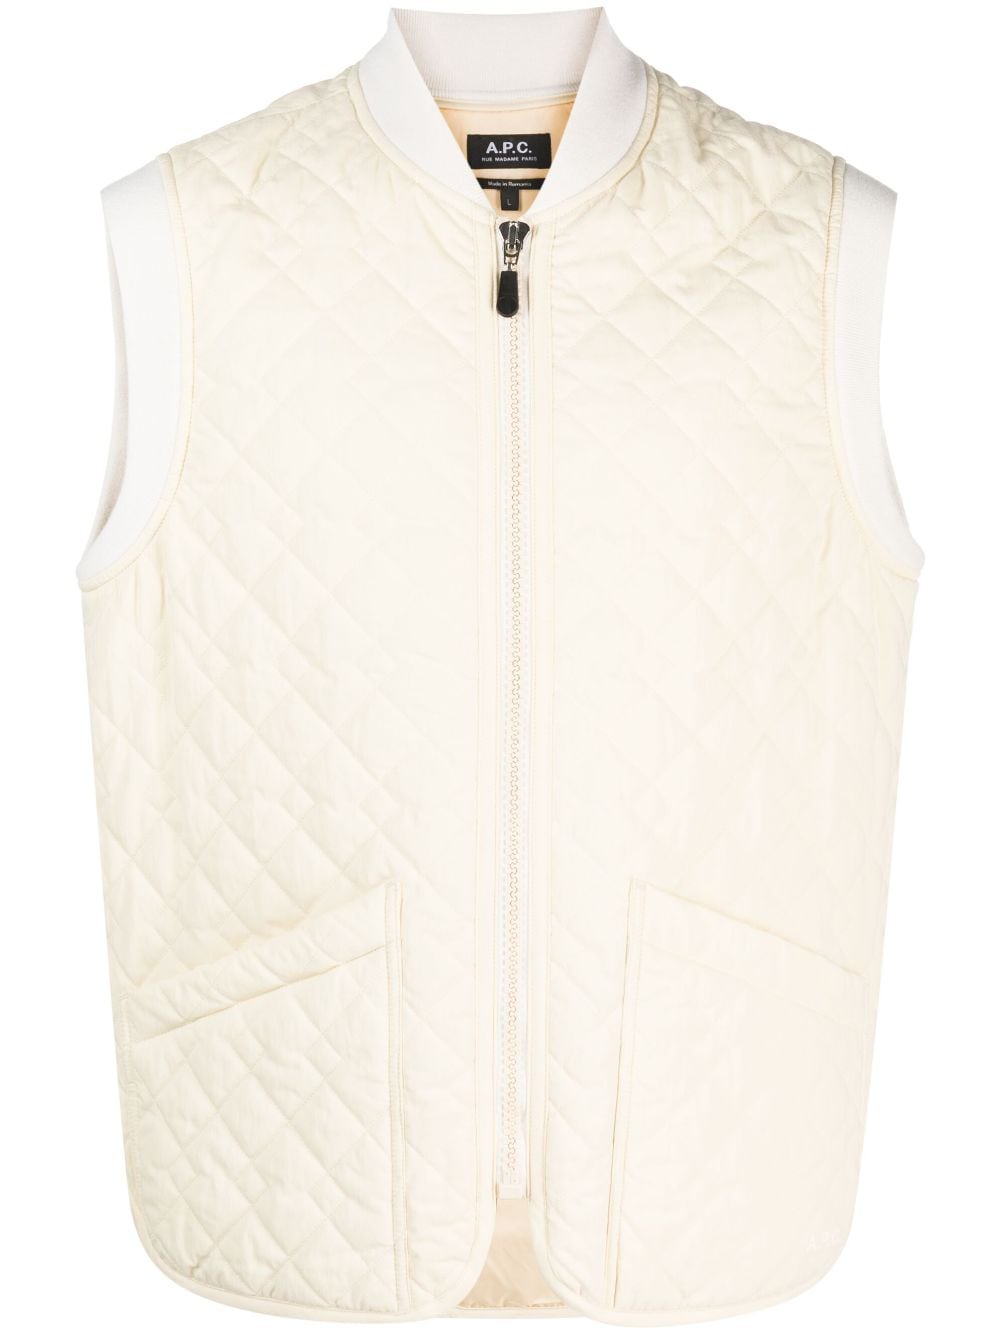 Image 1 of A.P.C. diamond-quilted zip-up gilet